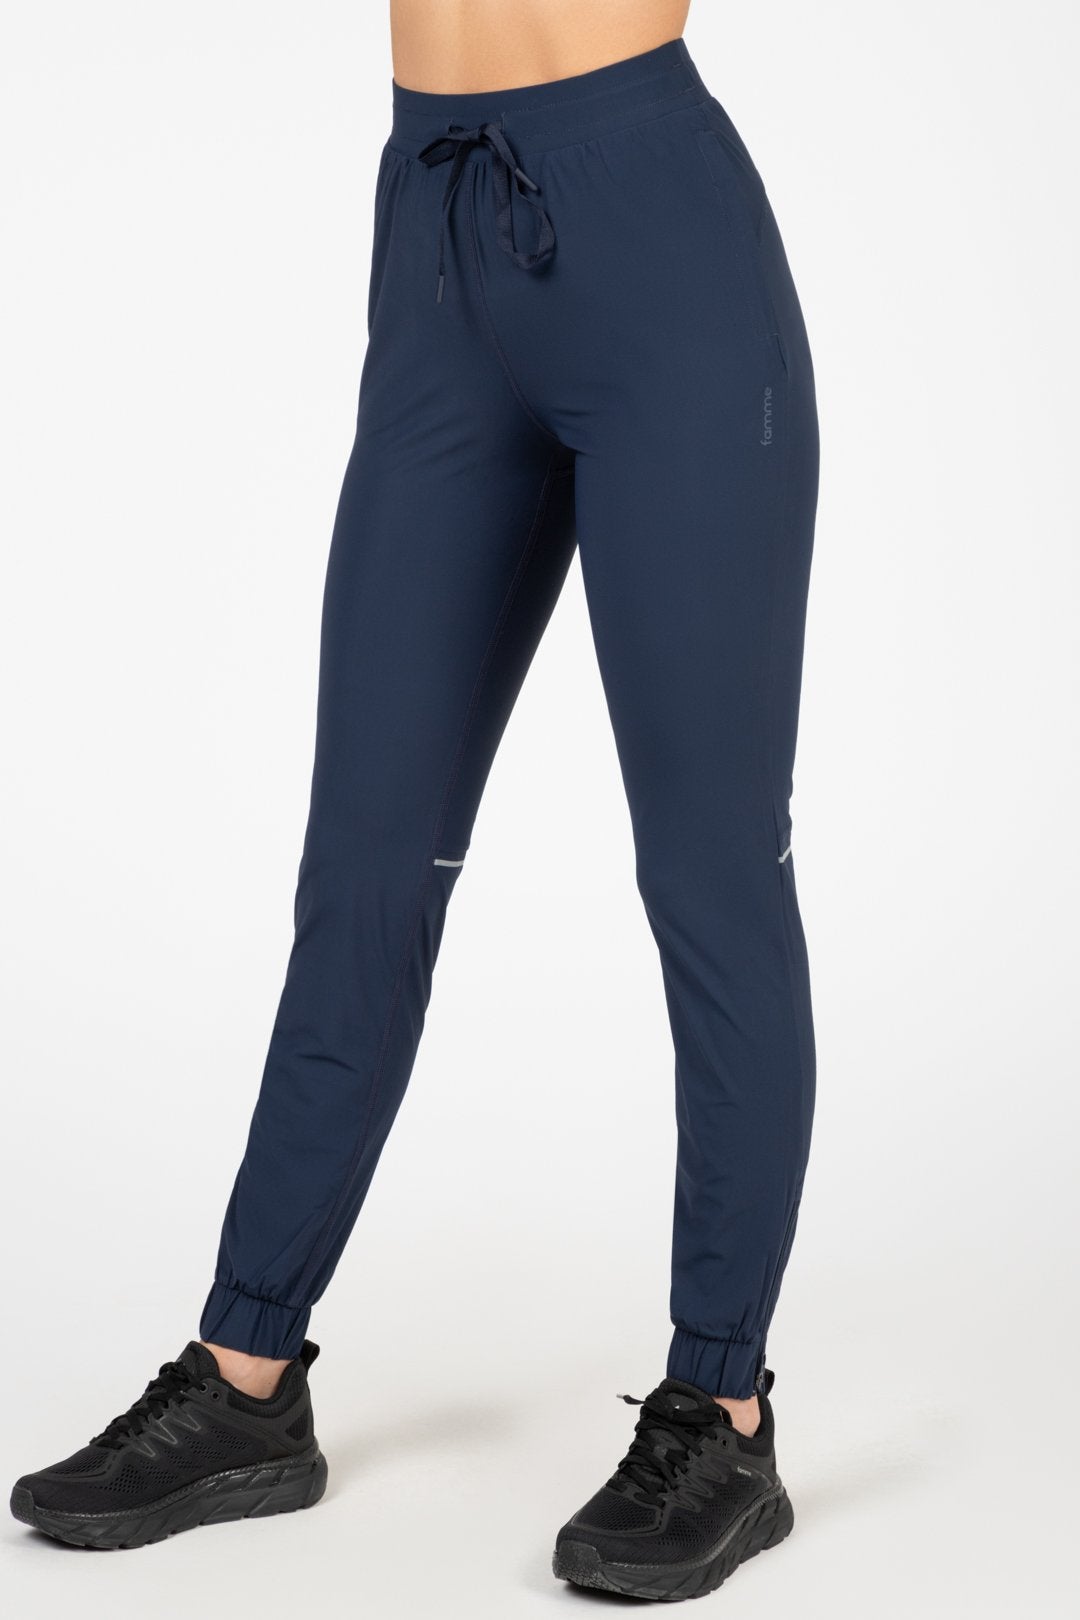 Women's Active Pants On United States, 44% OFF